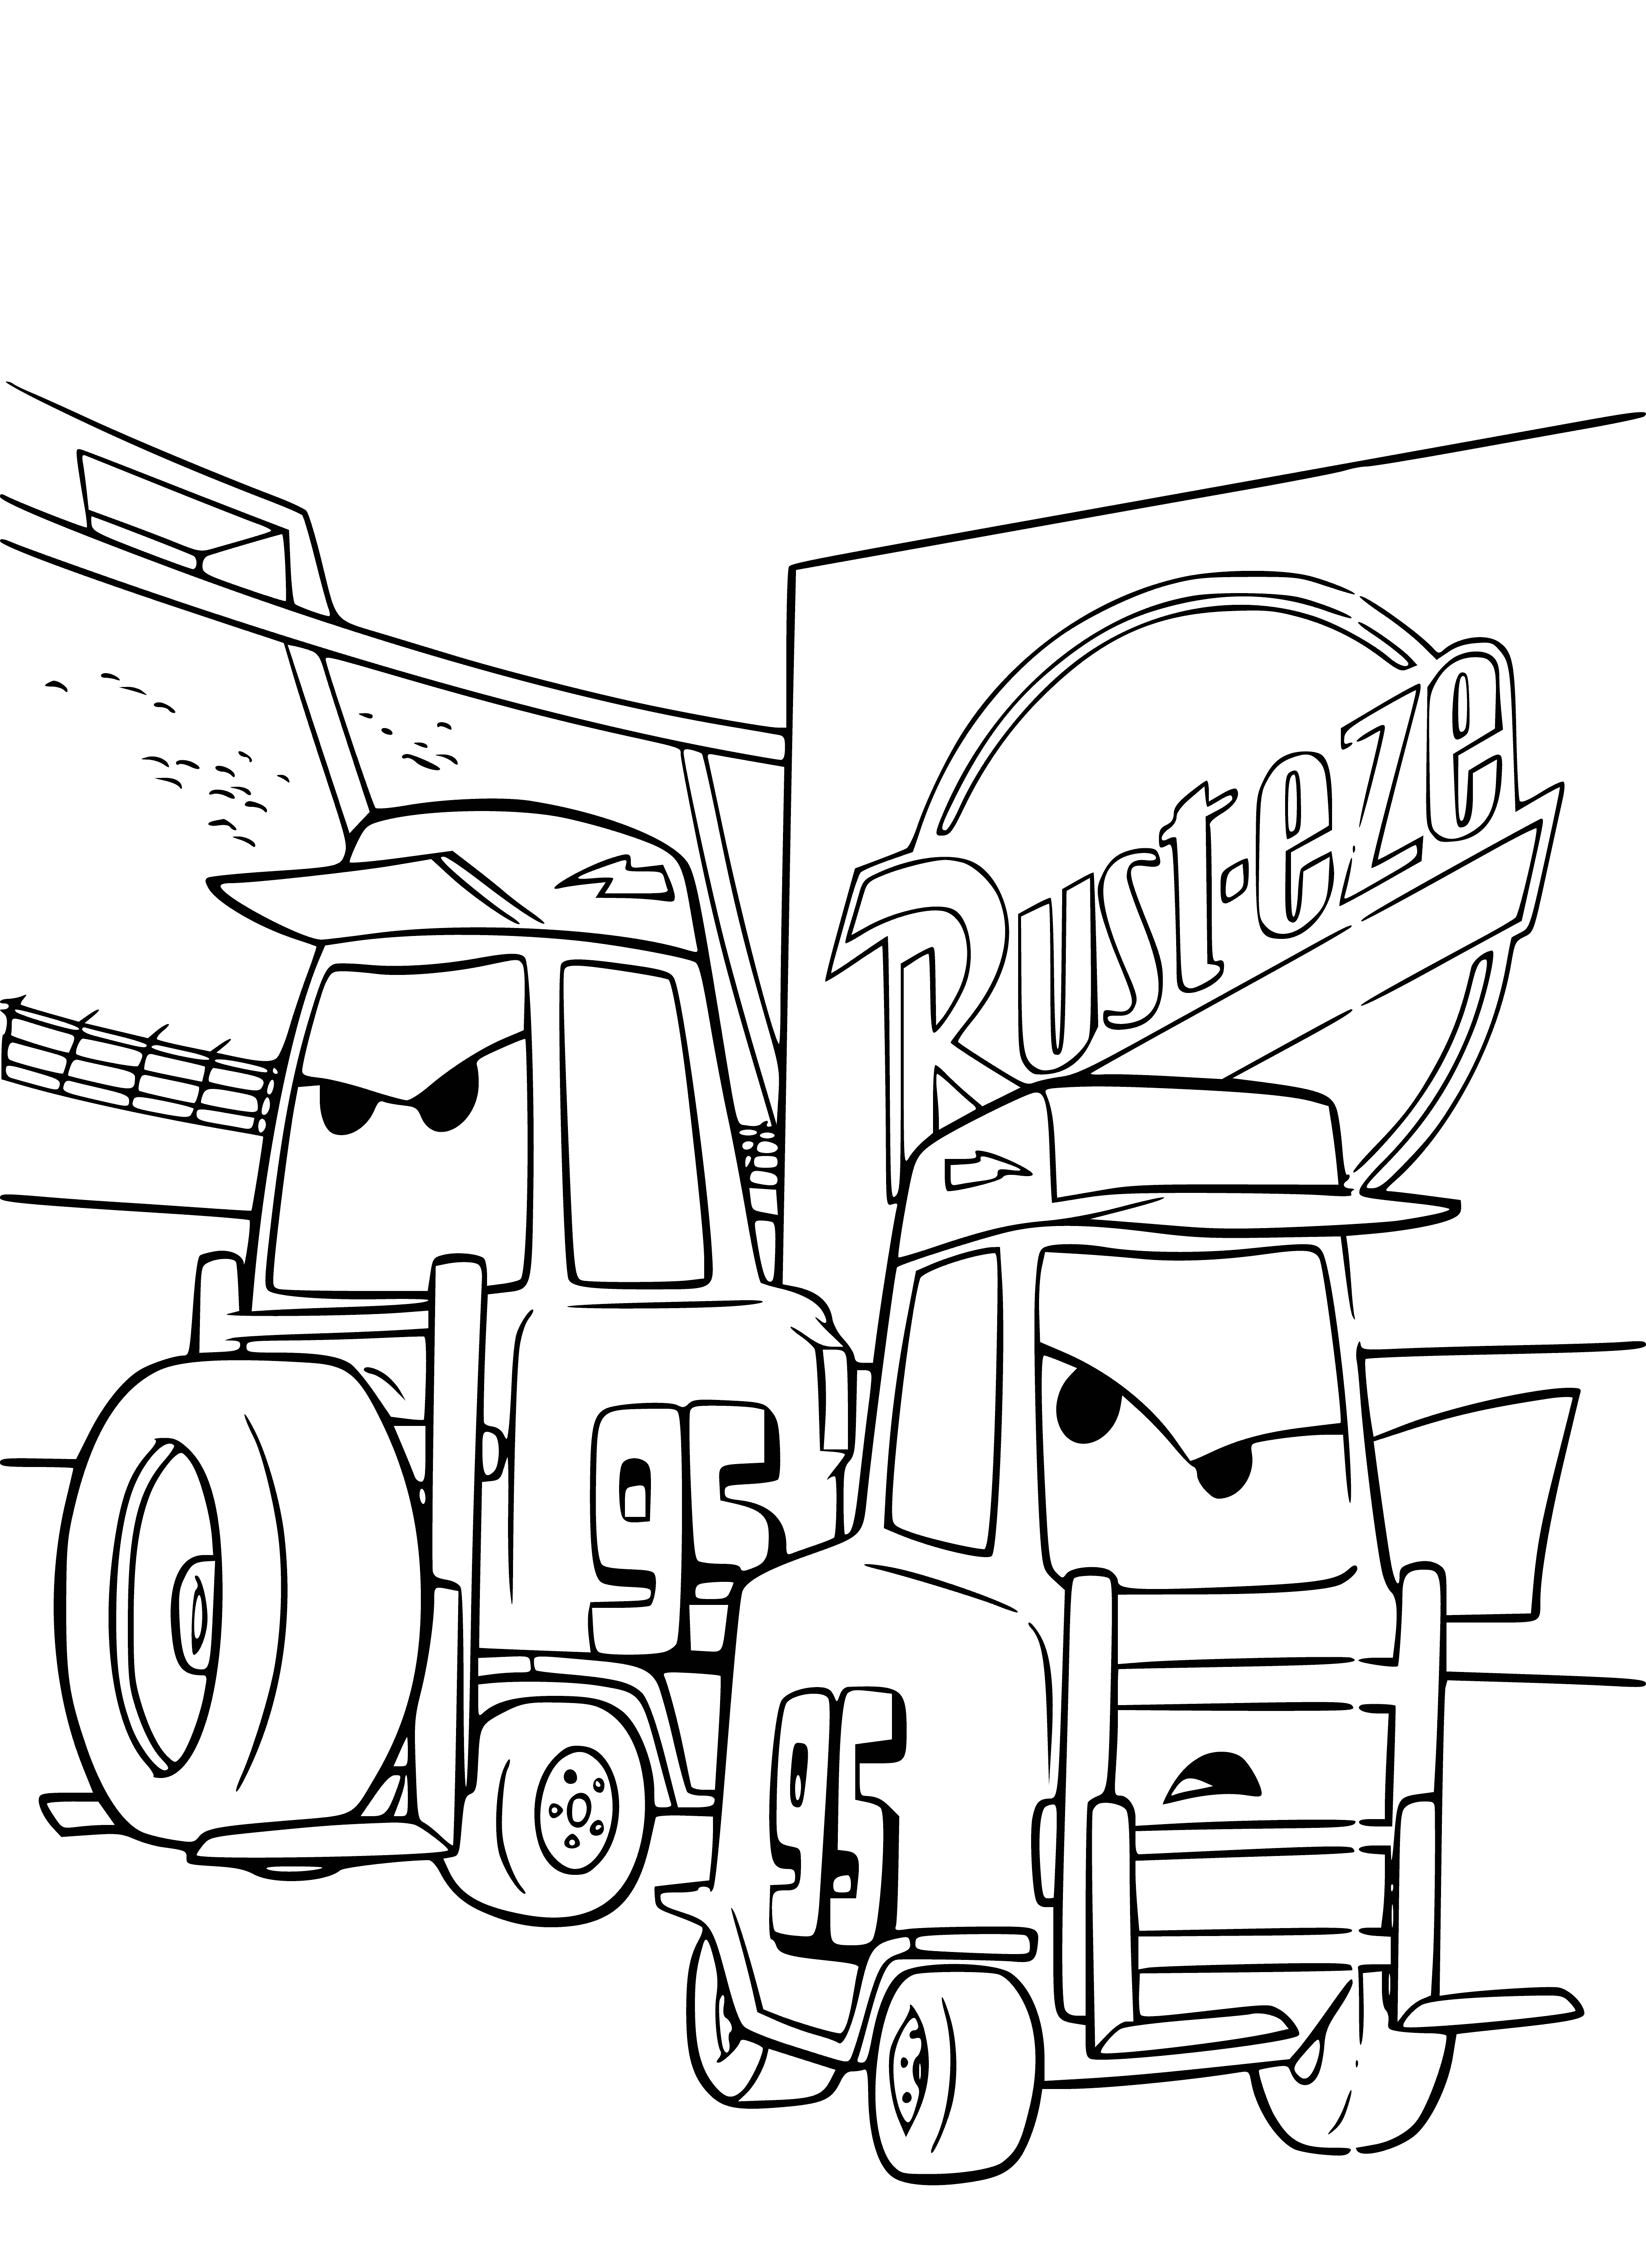 Lightning McQueen Team coloring page